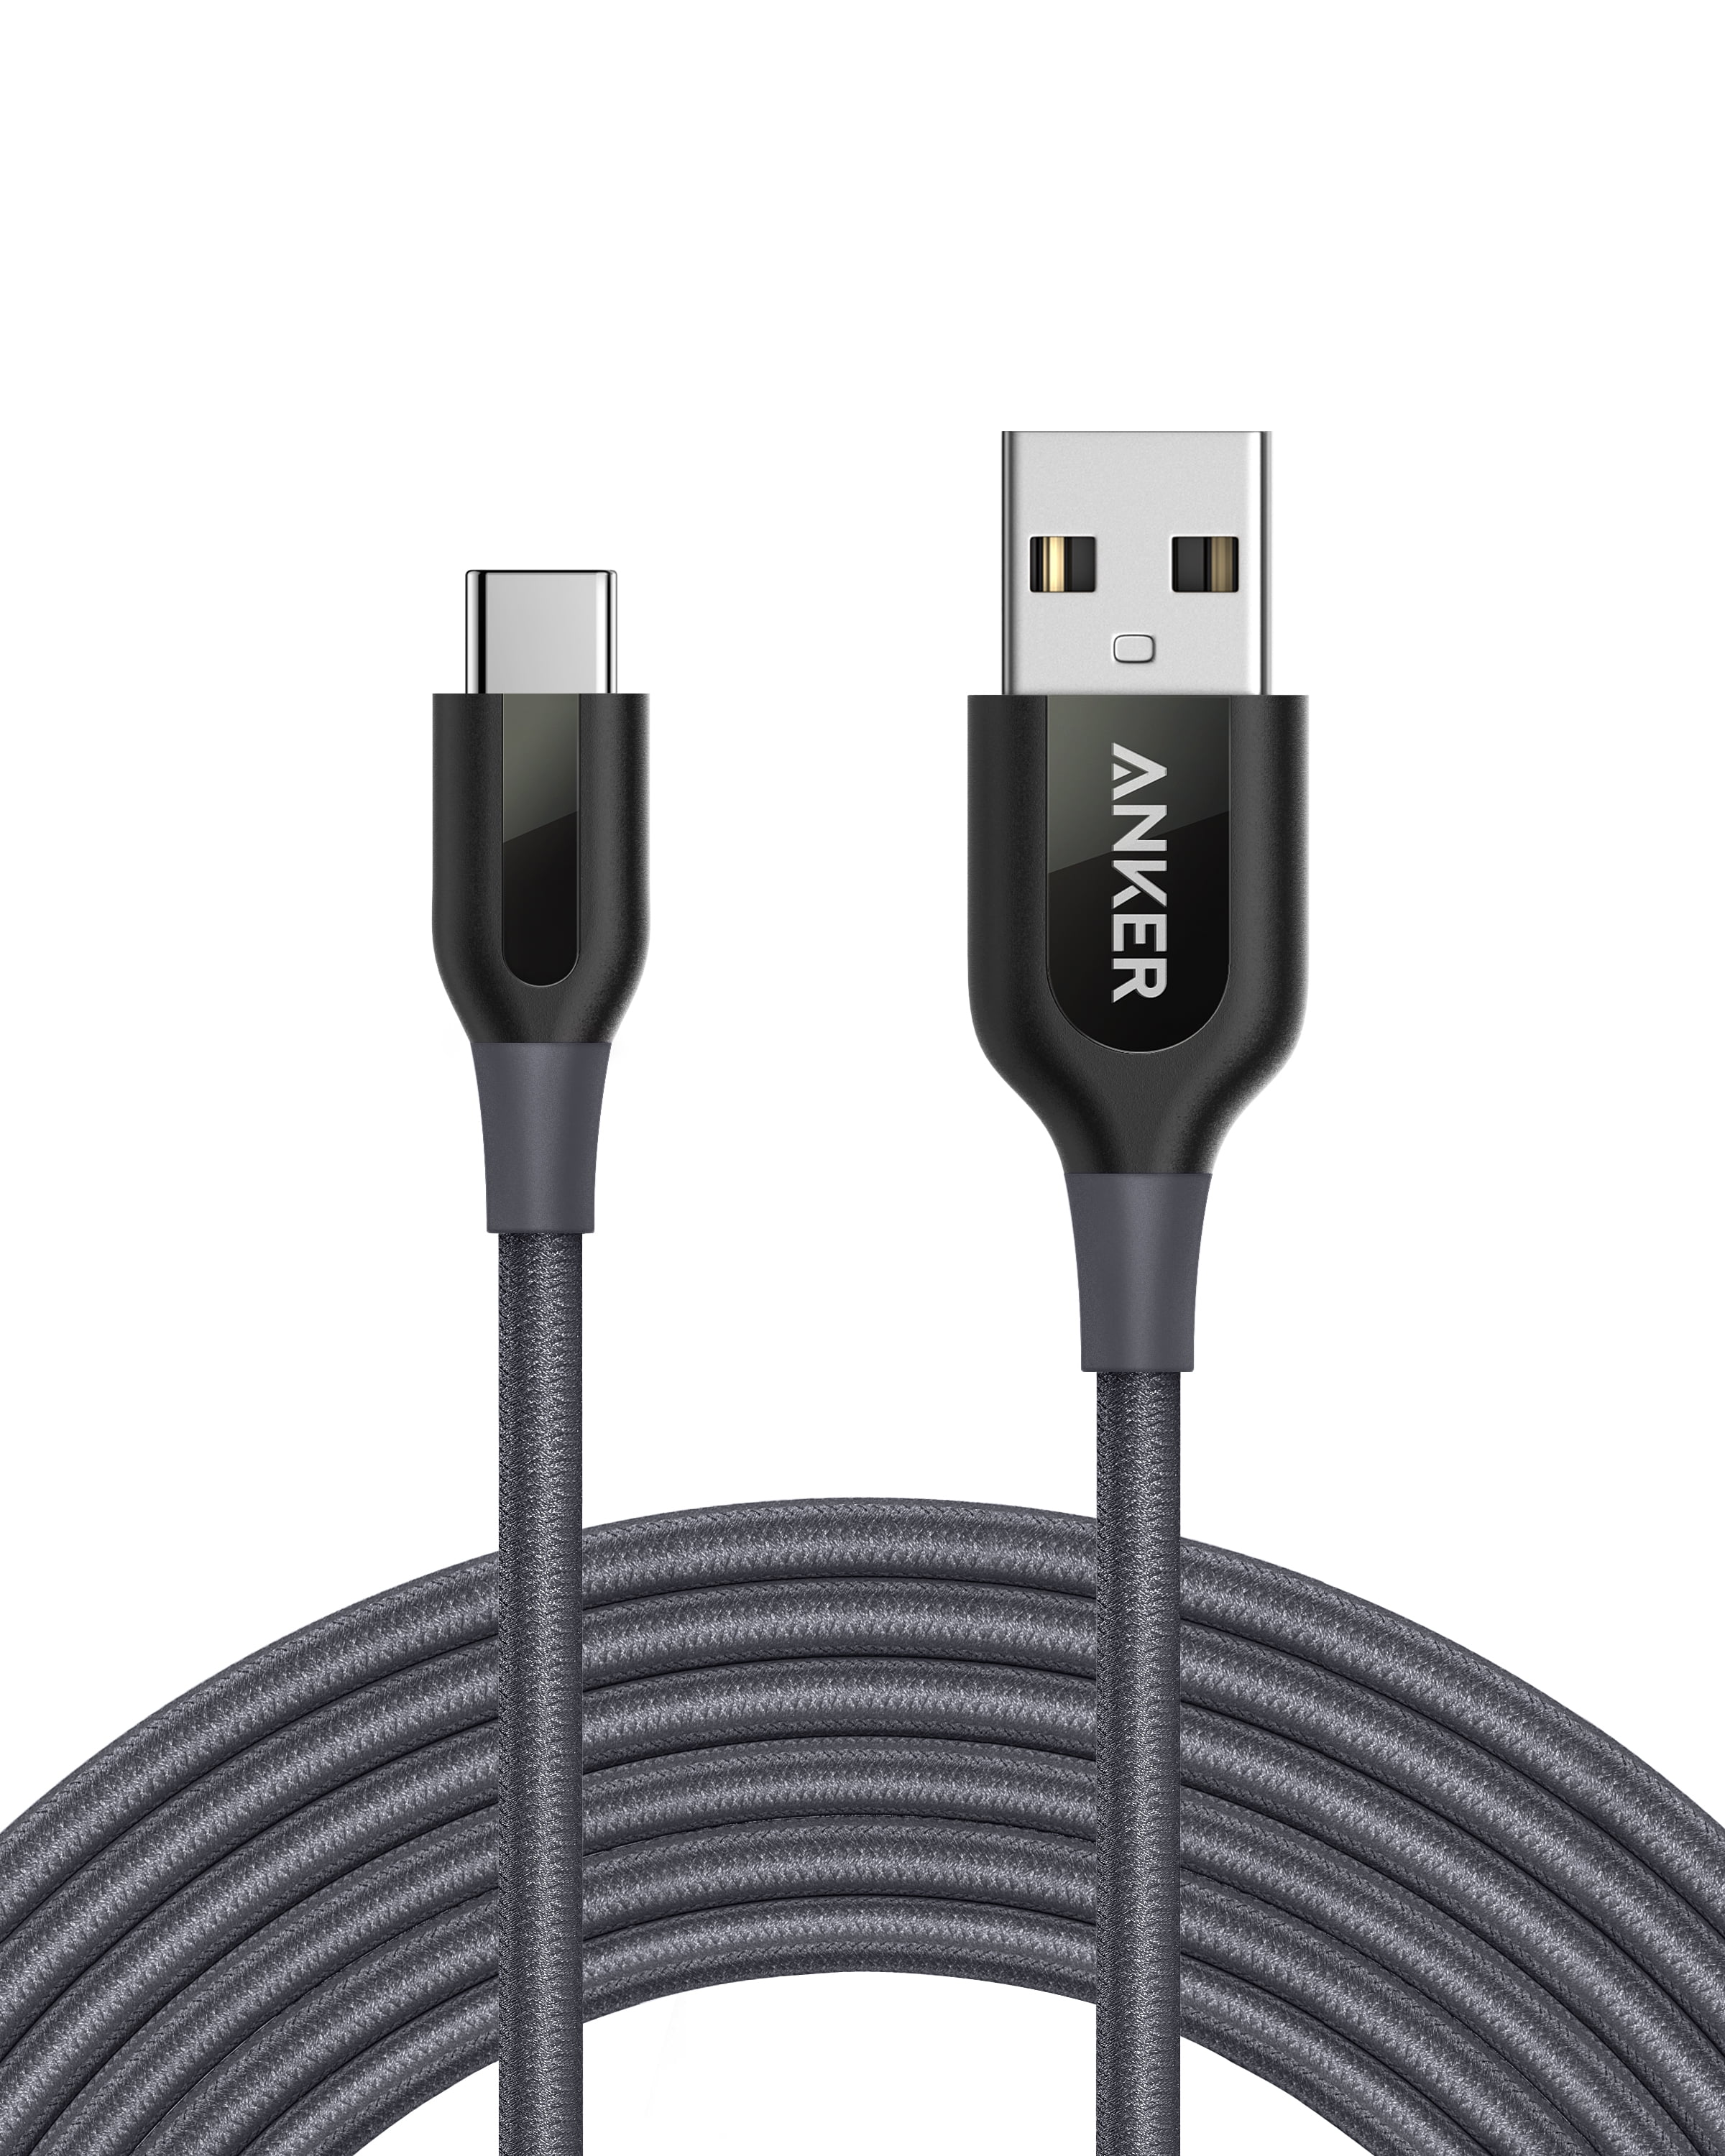 Anker Powerline+ USB-C to USB-A Double-Braided Nylon Fast Charging Cable, 10ft./10' for Samsung Galaxy, Note 8 and More, Gray